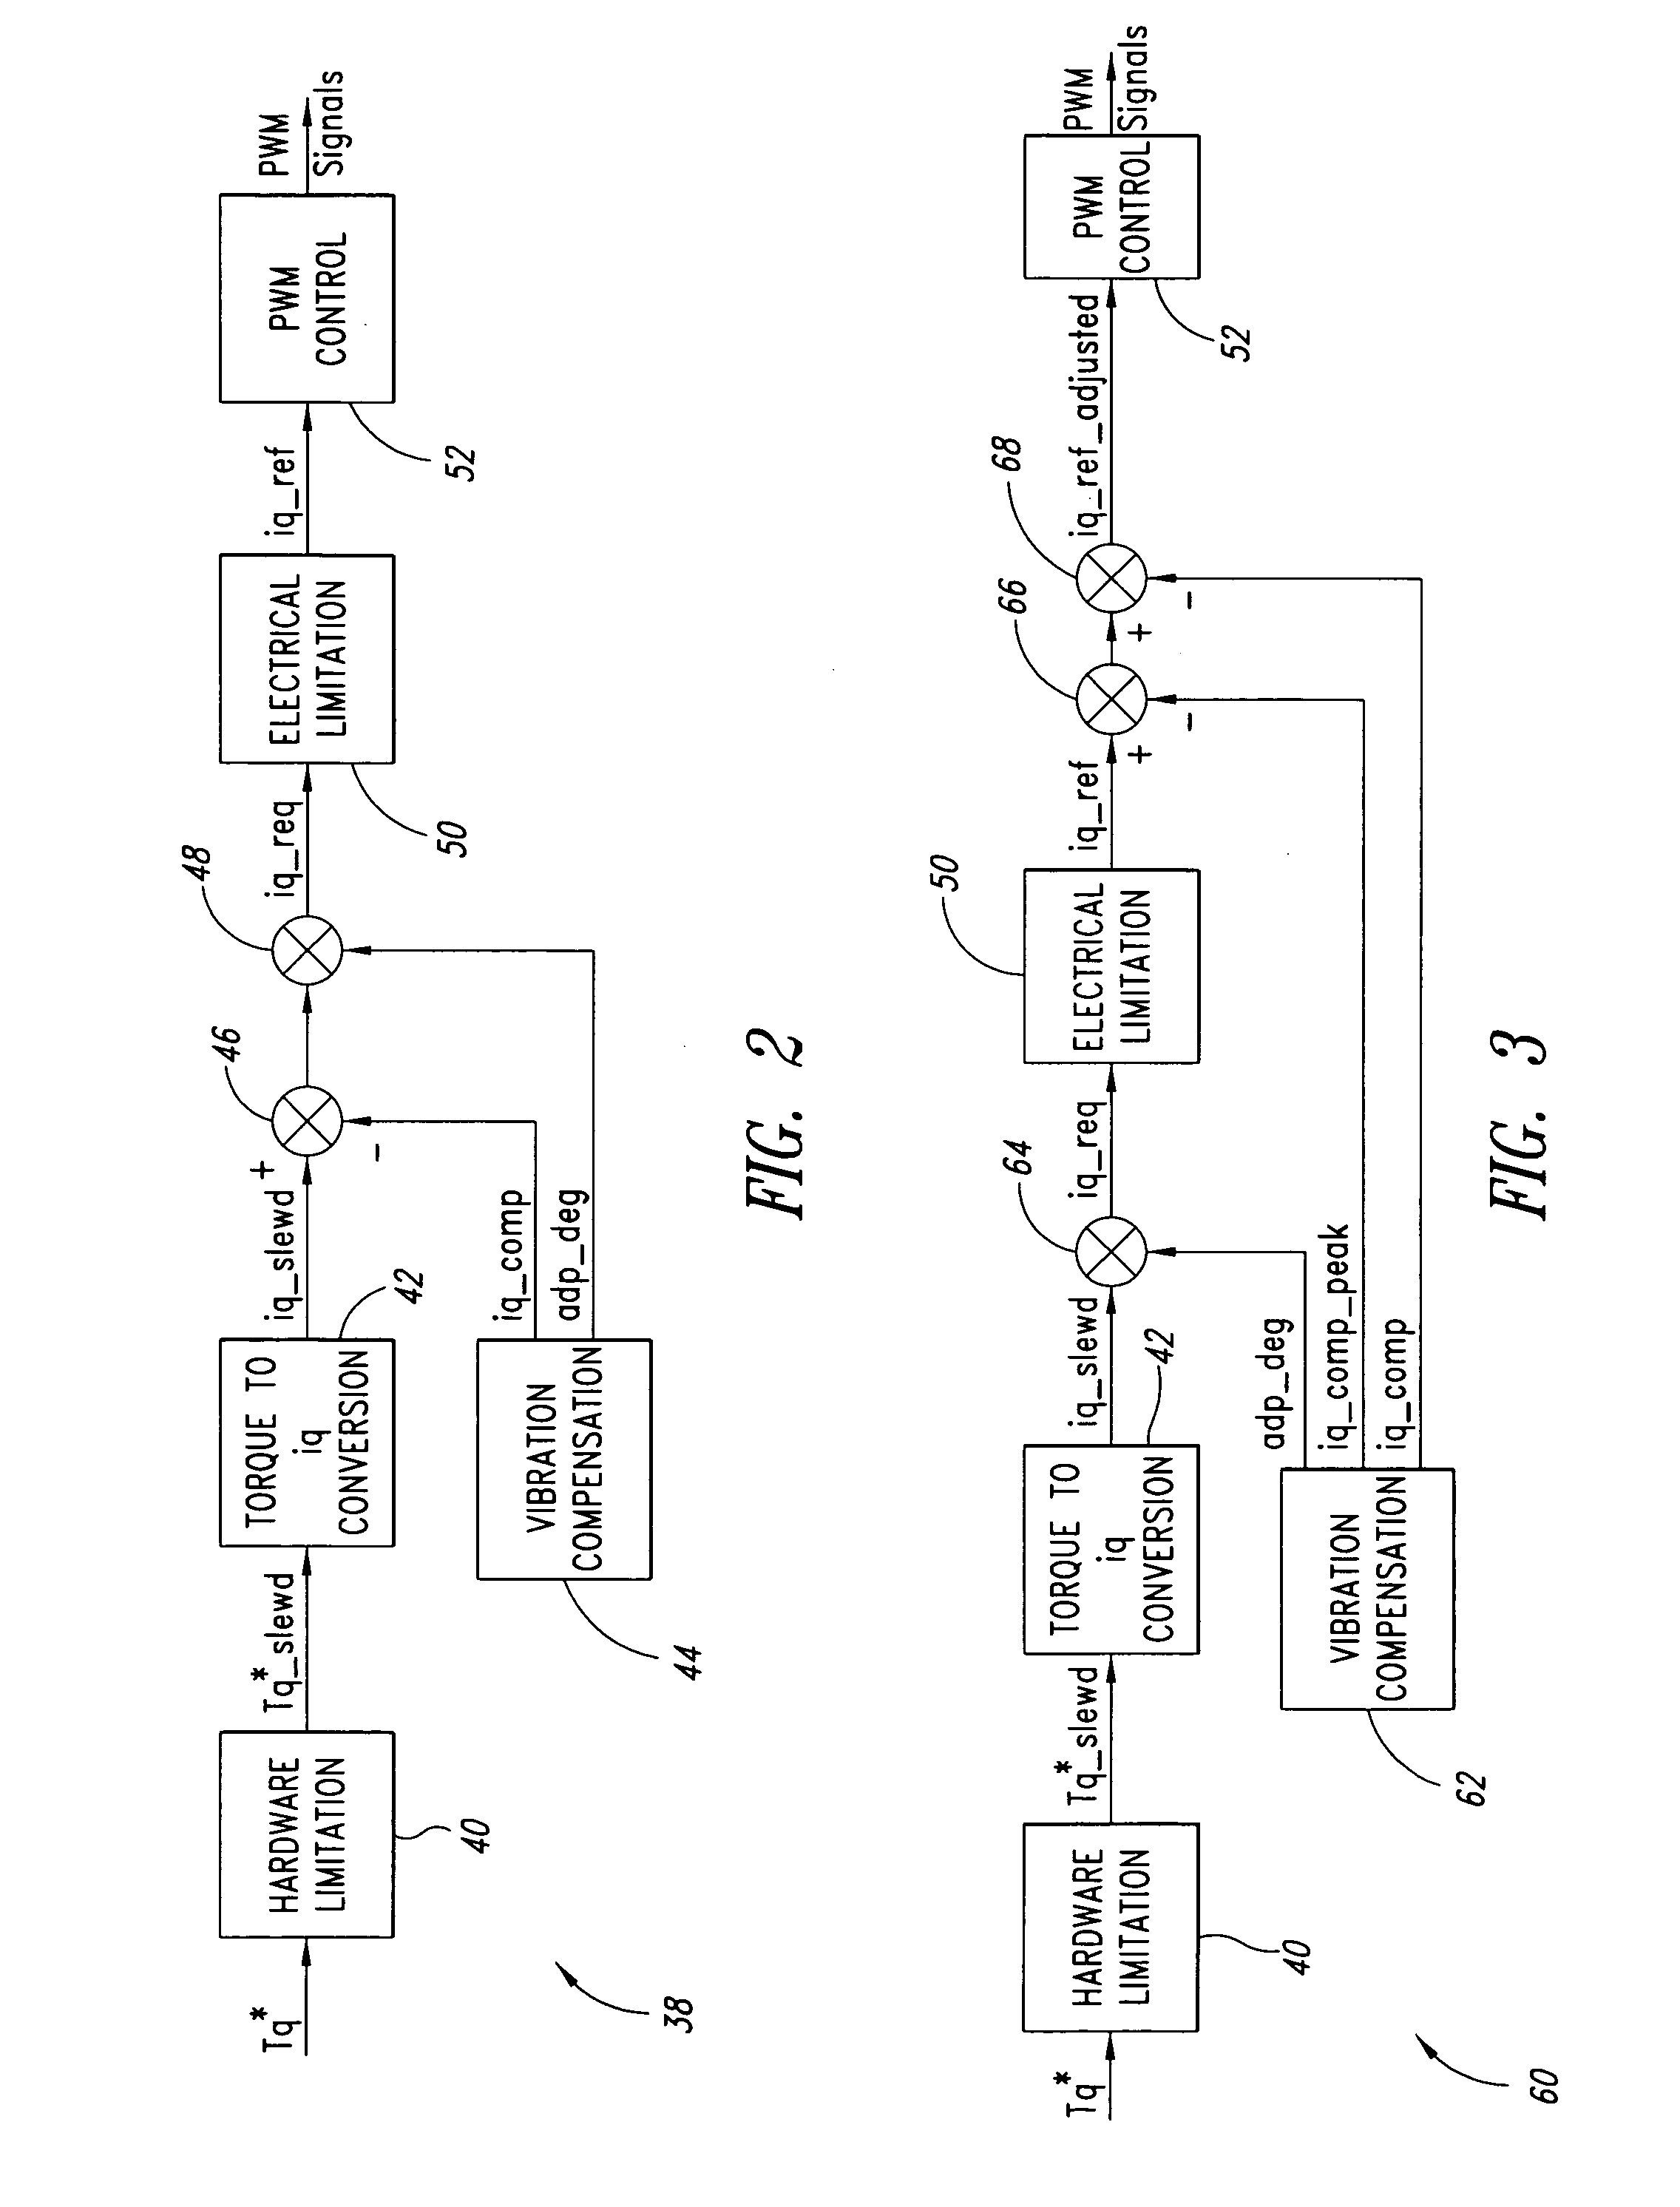 Method, apparatus and article for vibration compensation in electric drivetrains